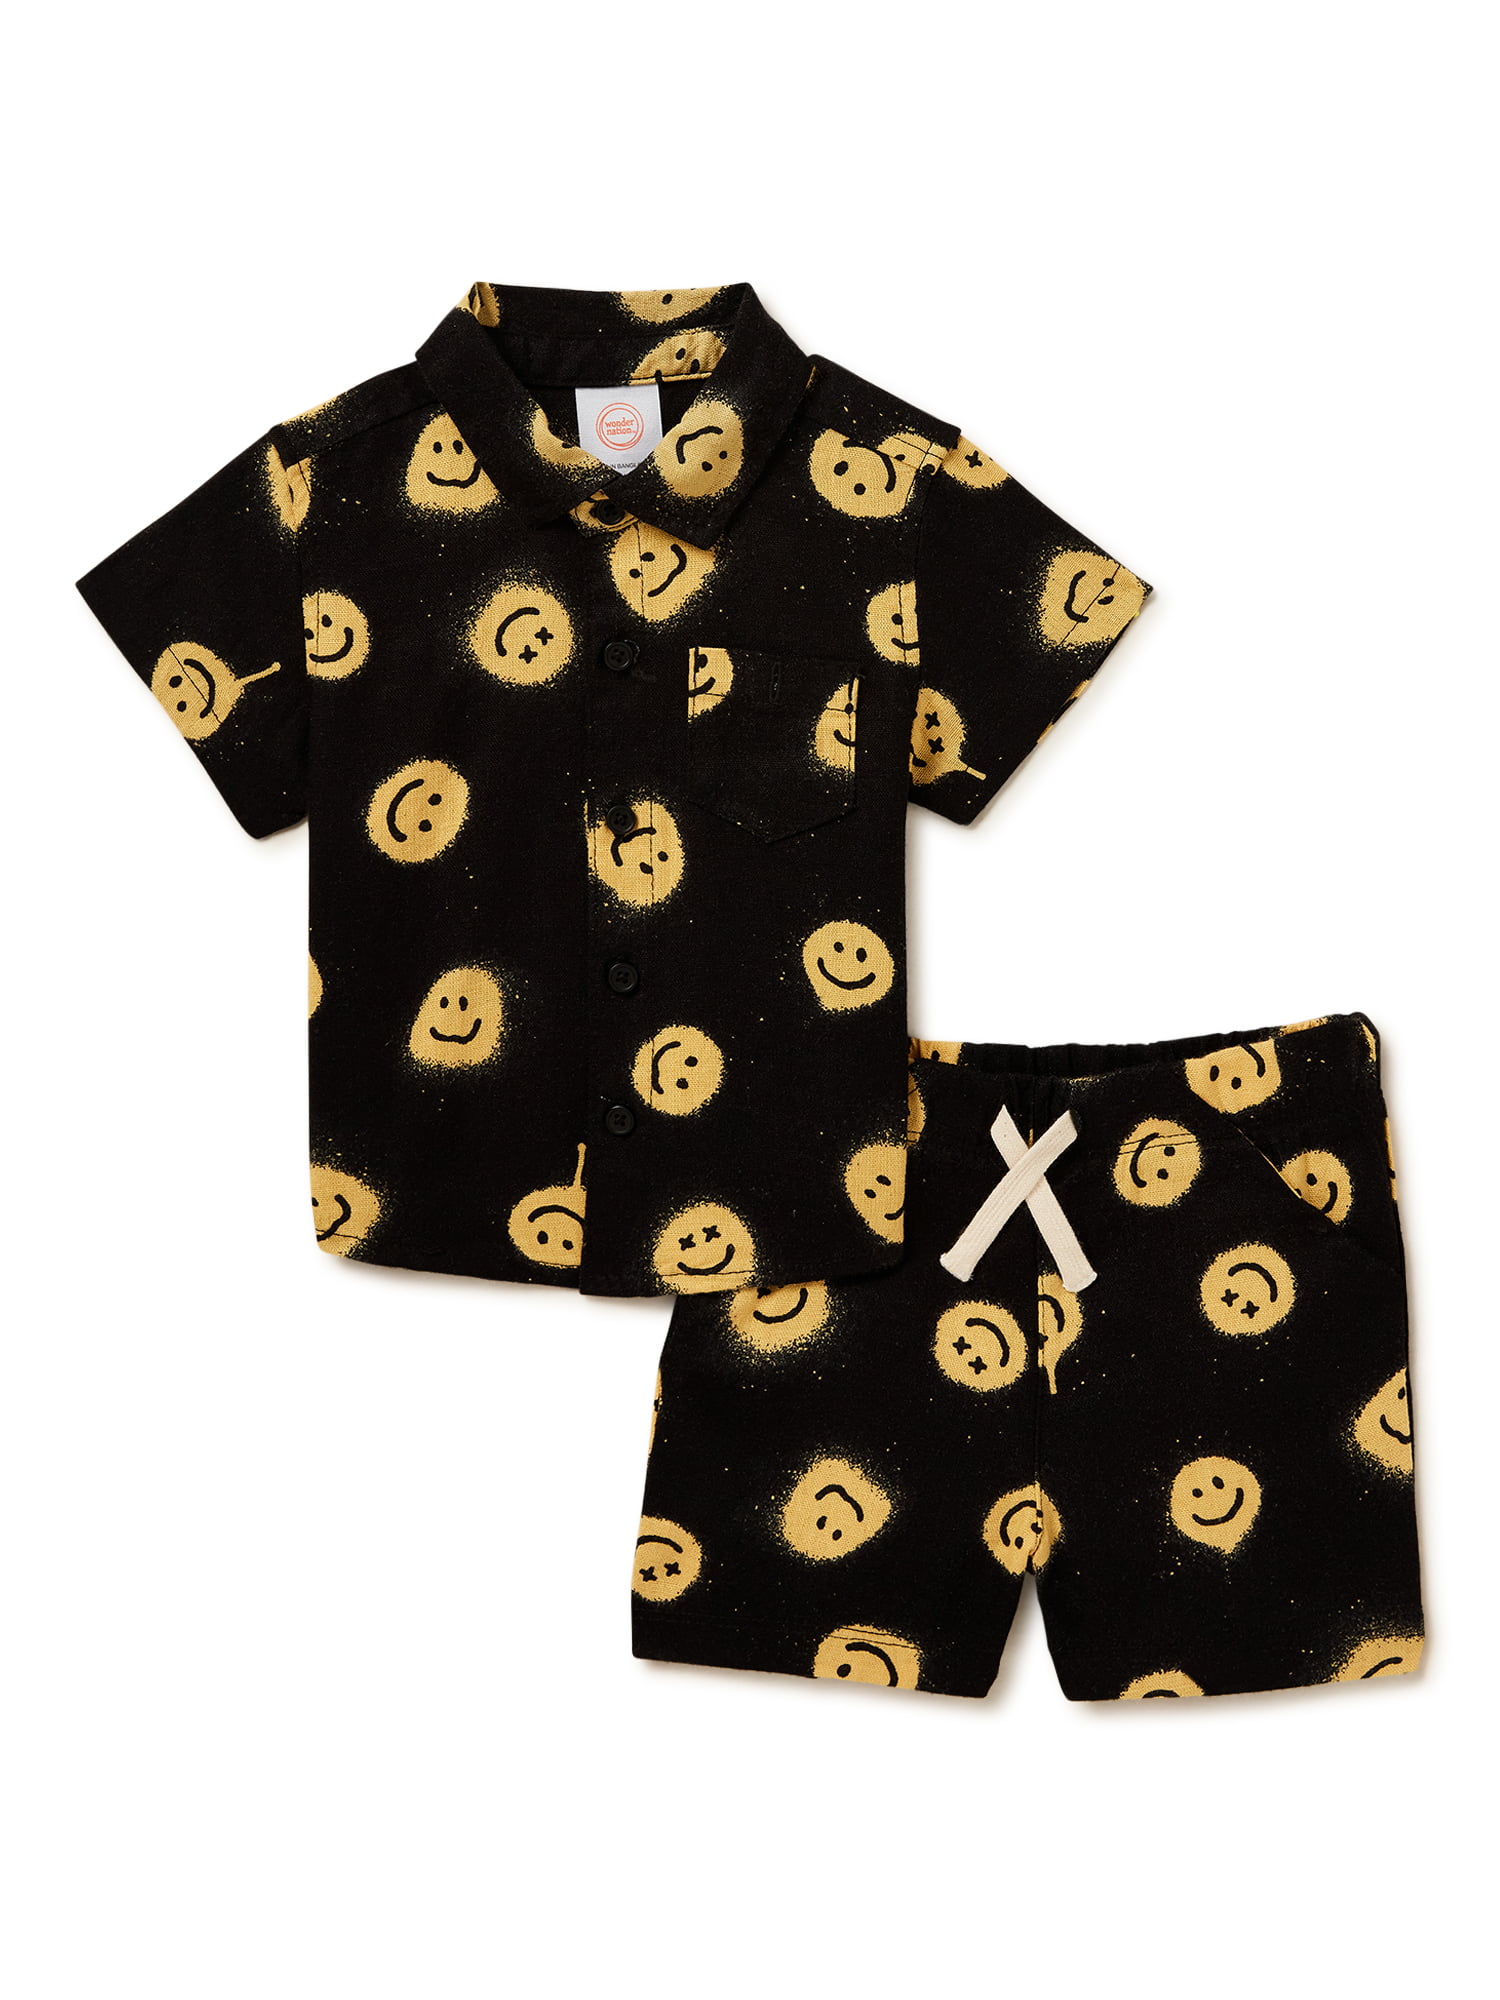 Wonder Nation Baby Boys Smiley Button Down Shirt and Shorts, 2-Piece Resort Set, Sizes 0-24 Months